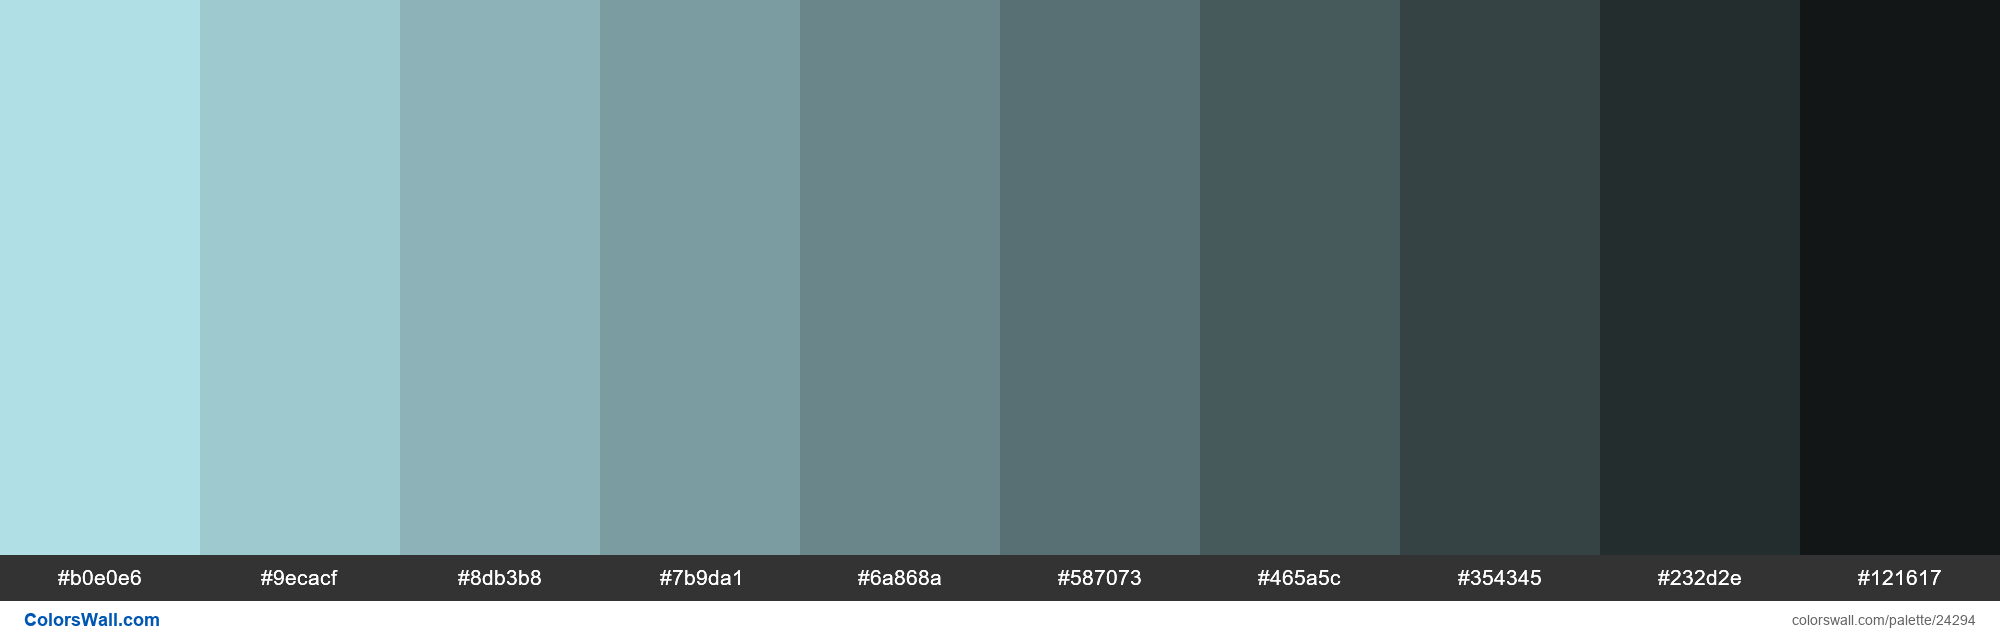 Charcoal Blue color hex code is #2D4256